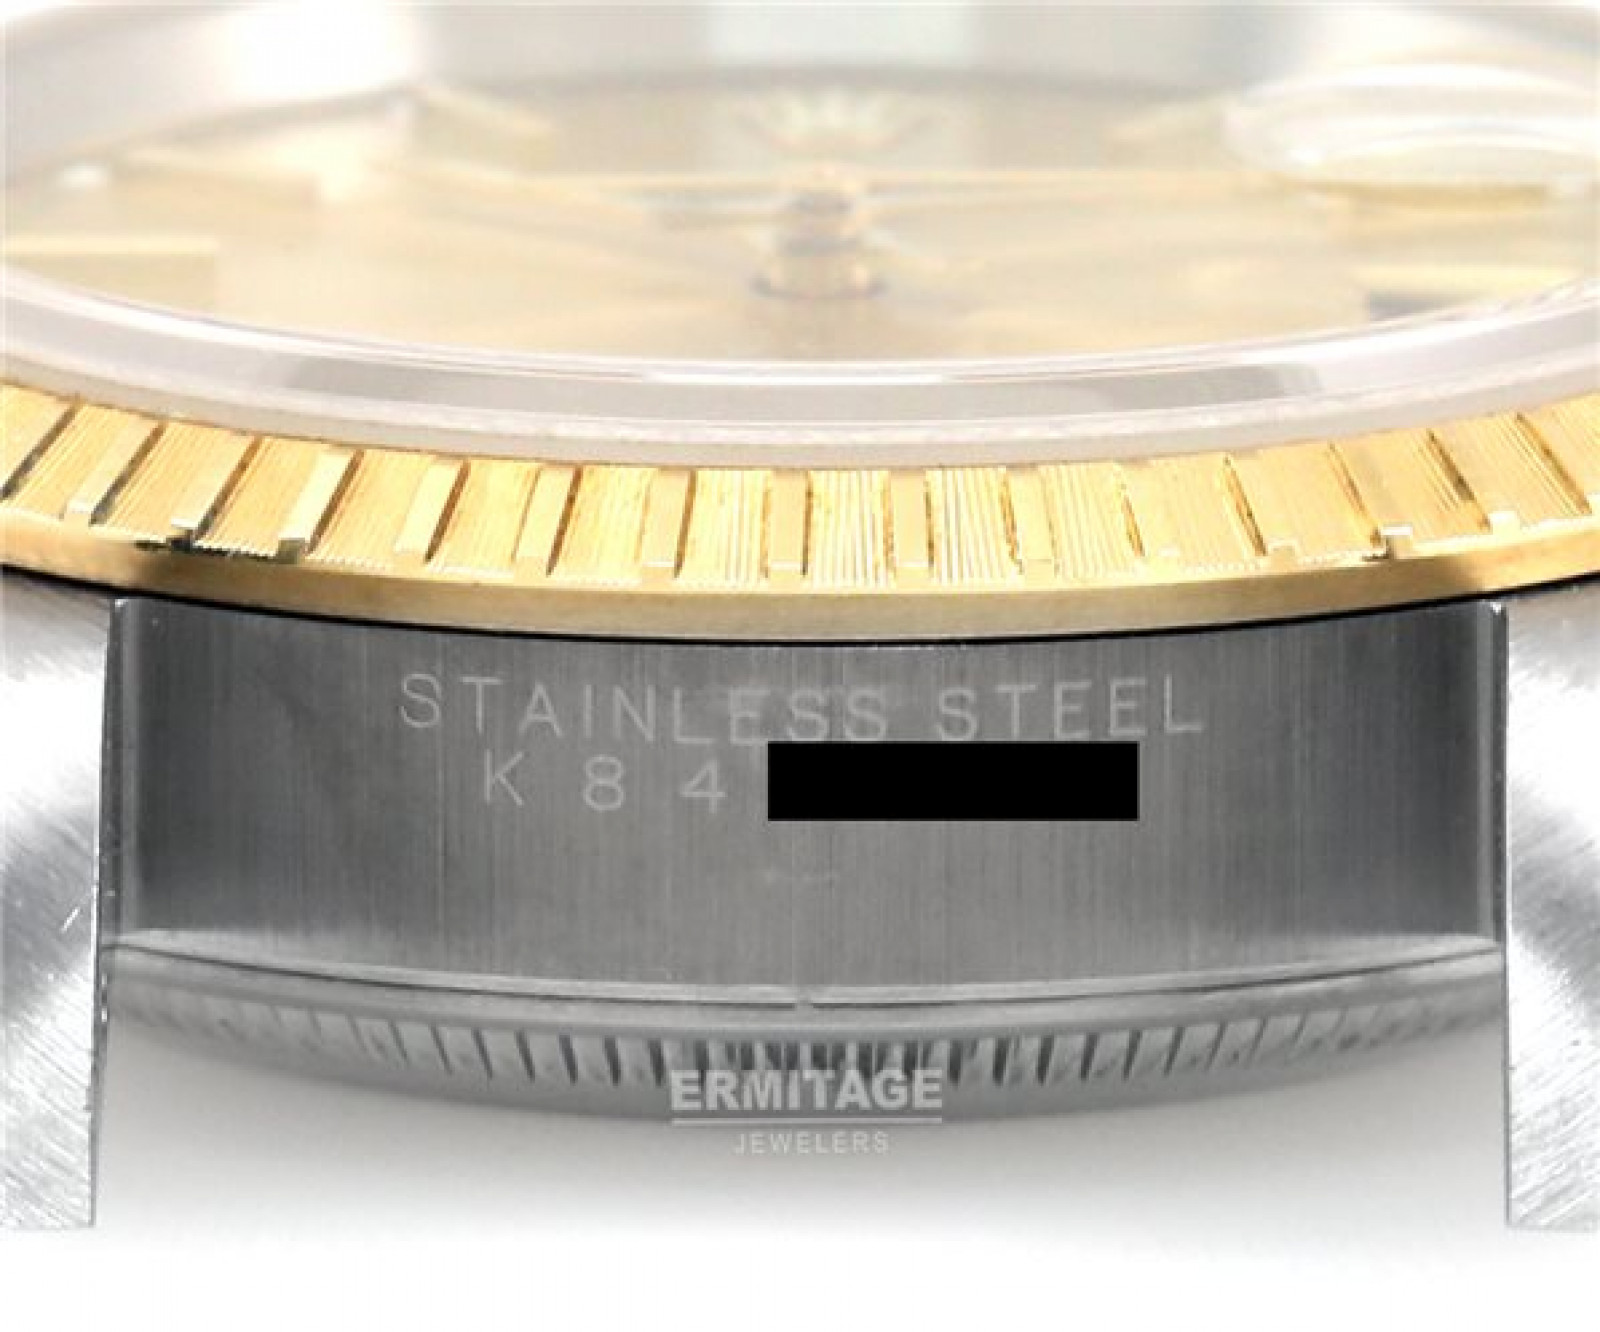 Gold Rolex Oyster Perpetual Date 15223